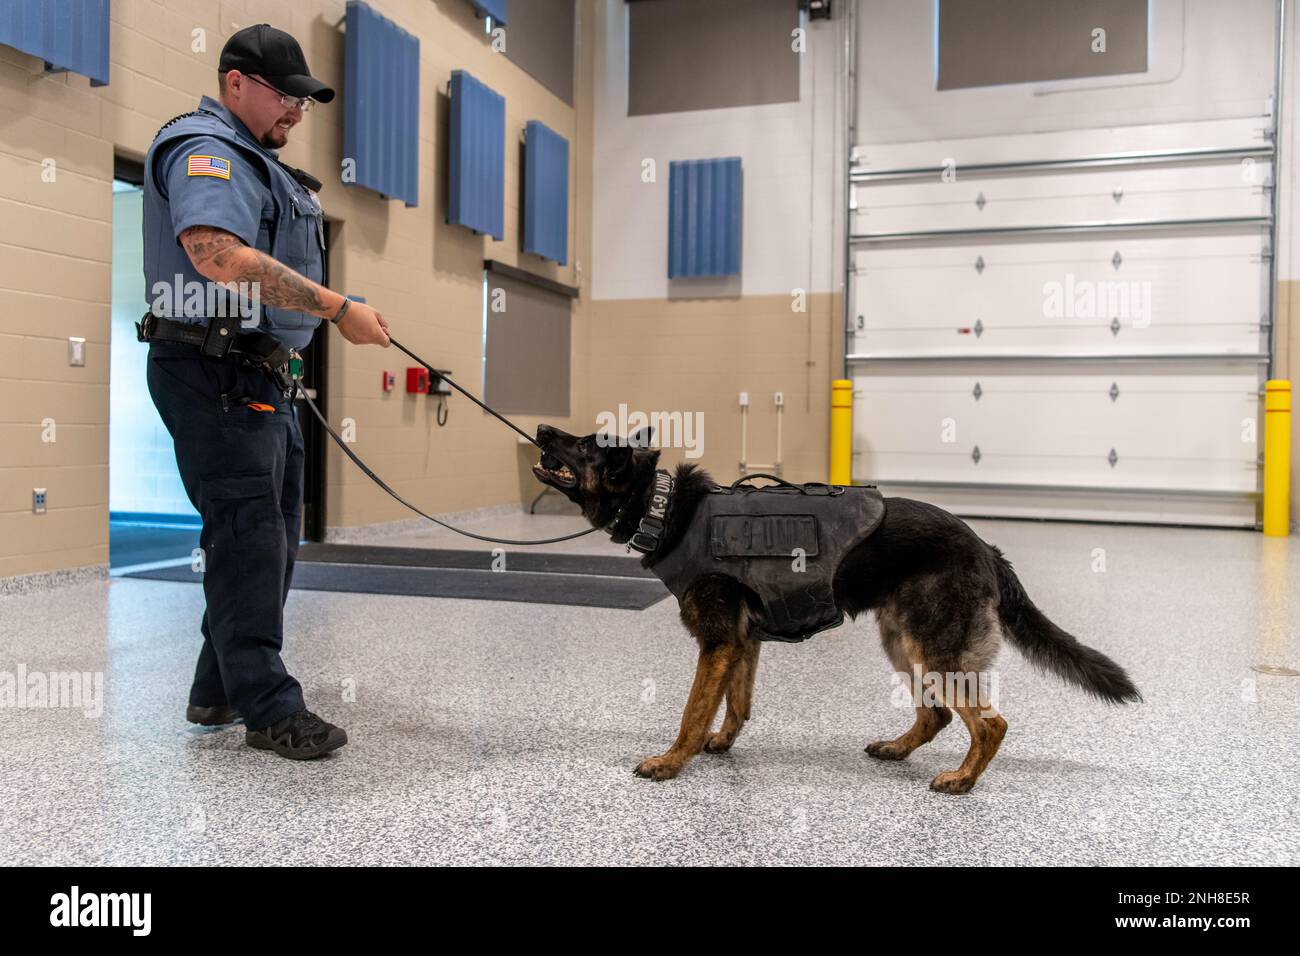 Nicholas Buchan, a K-9 officer assigned to ProMedica Security, rewards Josef, a K-9 assigned to ProMedica Security, with a toy, after finding a hidden training weapon during a practice search at the Ohio National Guard’s 180th Fighter Wing in Swanton, Ohio, July 21, 2022. The K-9 officers visited the 180FW to learn about the unit’s security forces mission, sharing best practices and strengthening community partnerships. Stock Photo